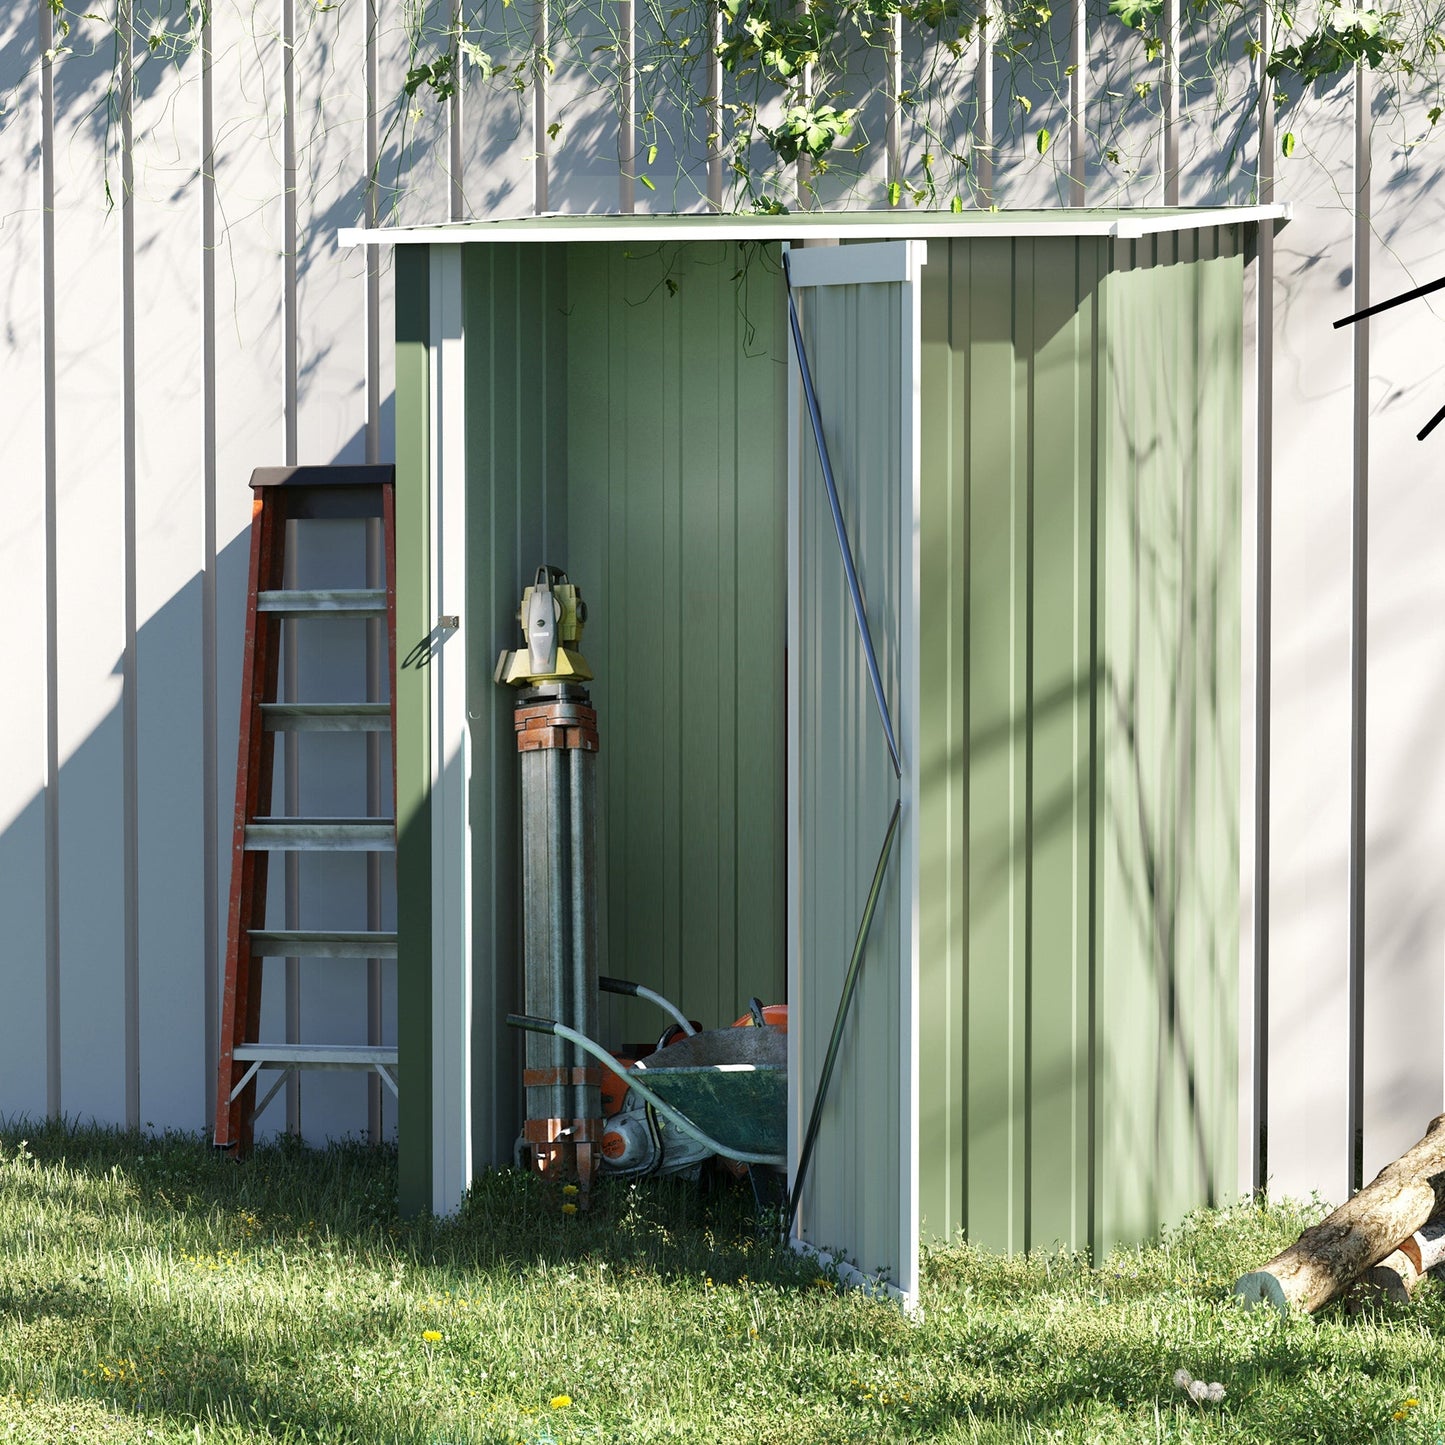 Outdoor and Garden-5' x 3' Storage Metal Shed, Patio Tool Shed Cabinet with Lockable Door for Backyard, Patio, Lawn Green, Garage - Outdoor Style Company